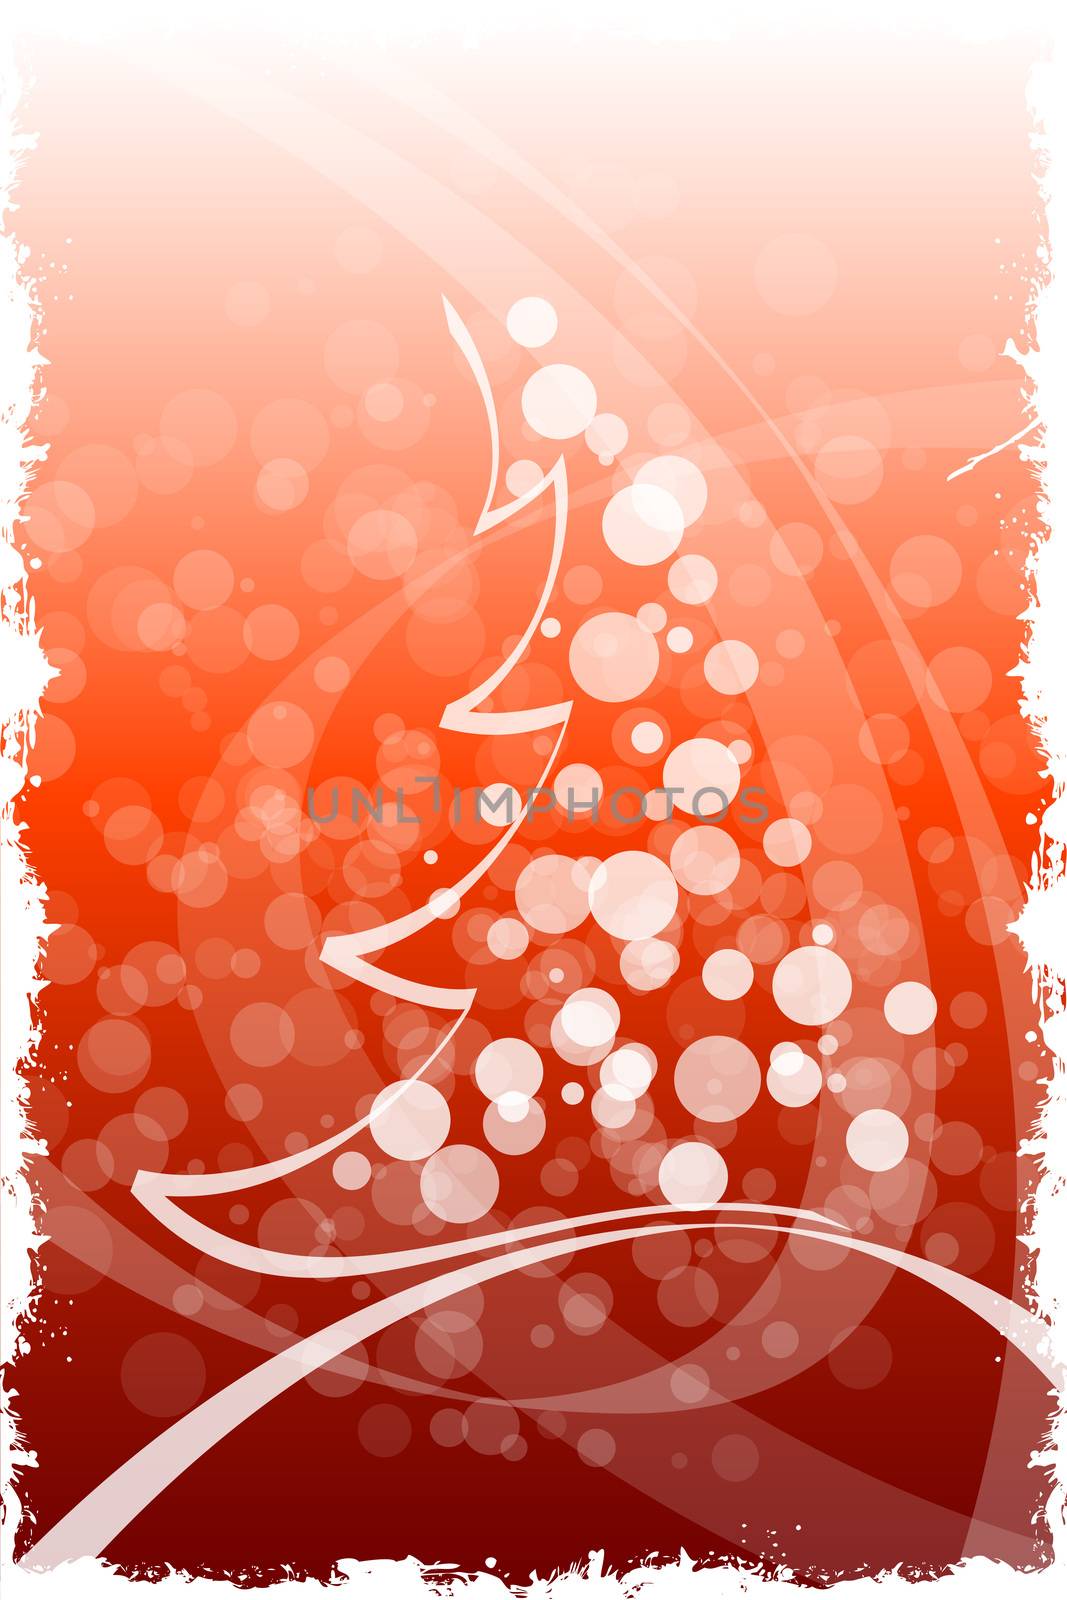 Grunge Winter and Christmas background by WaD